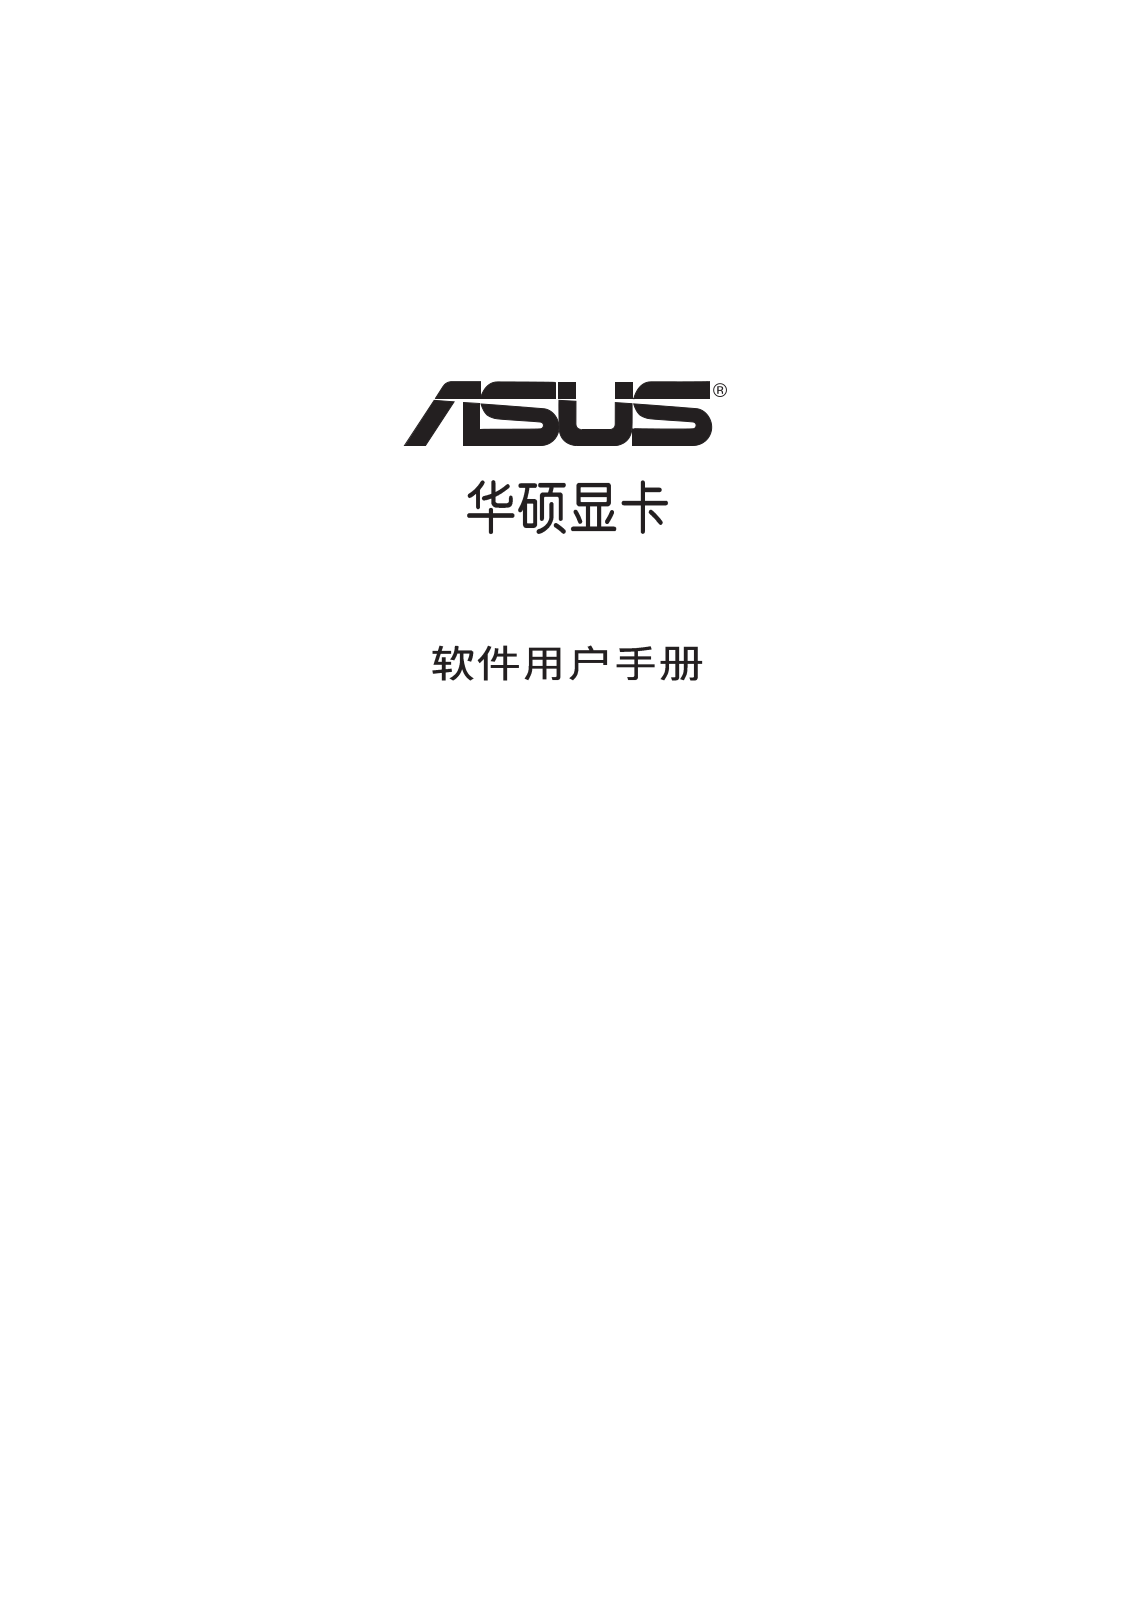 Asus V9400, EN5750, EAX600, AX800, EAX550 GRAPHIC CARD DRIVERS AND UTILITIES INSTALLATION GUIDE